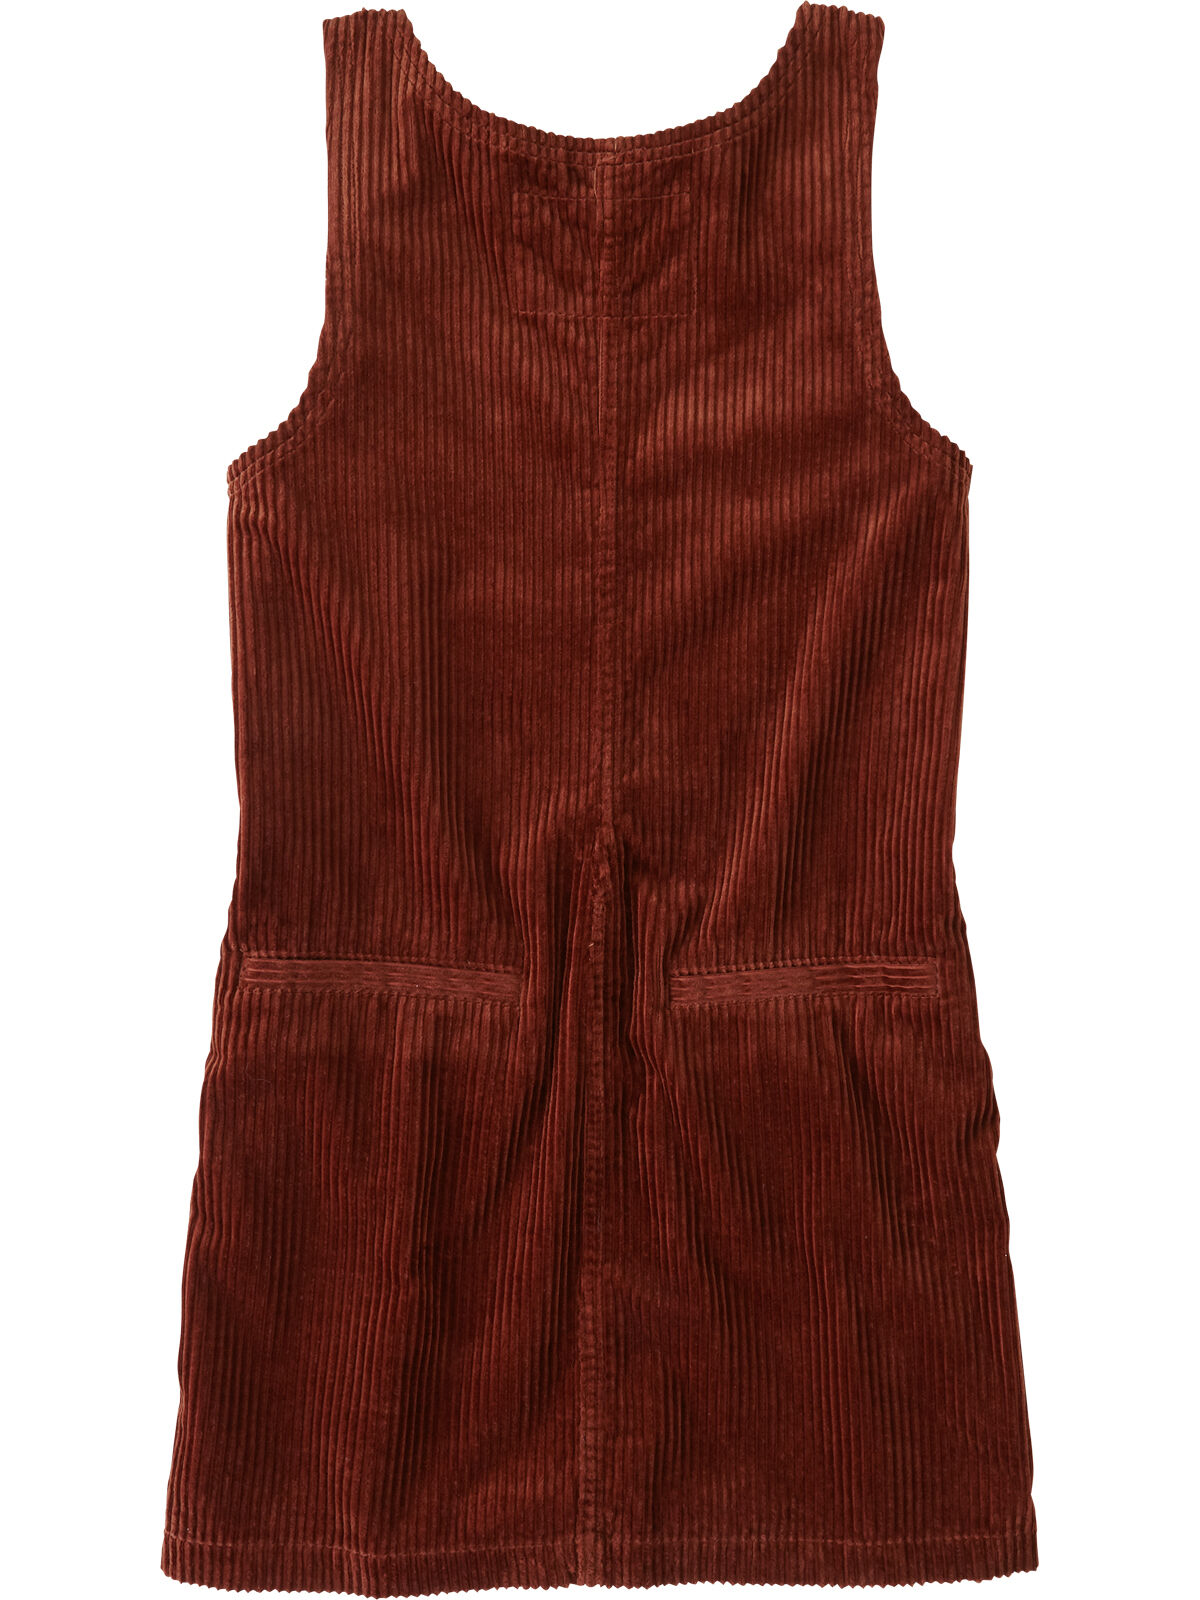 Jumper Dress Savvy Corduroy - Toad☀Co ...